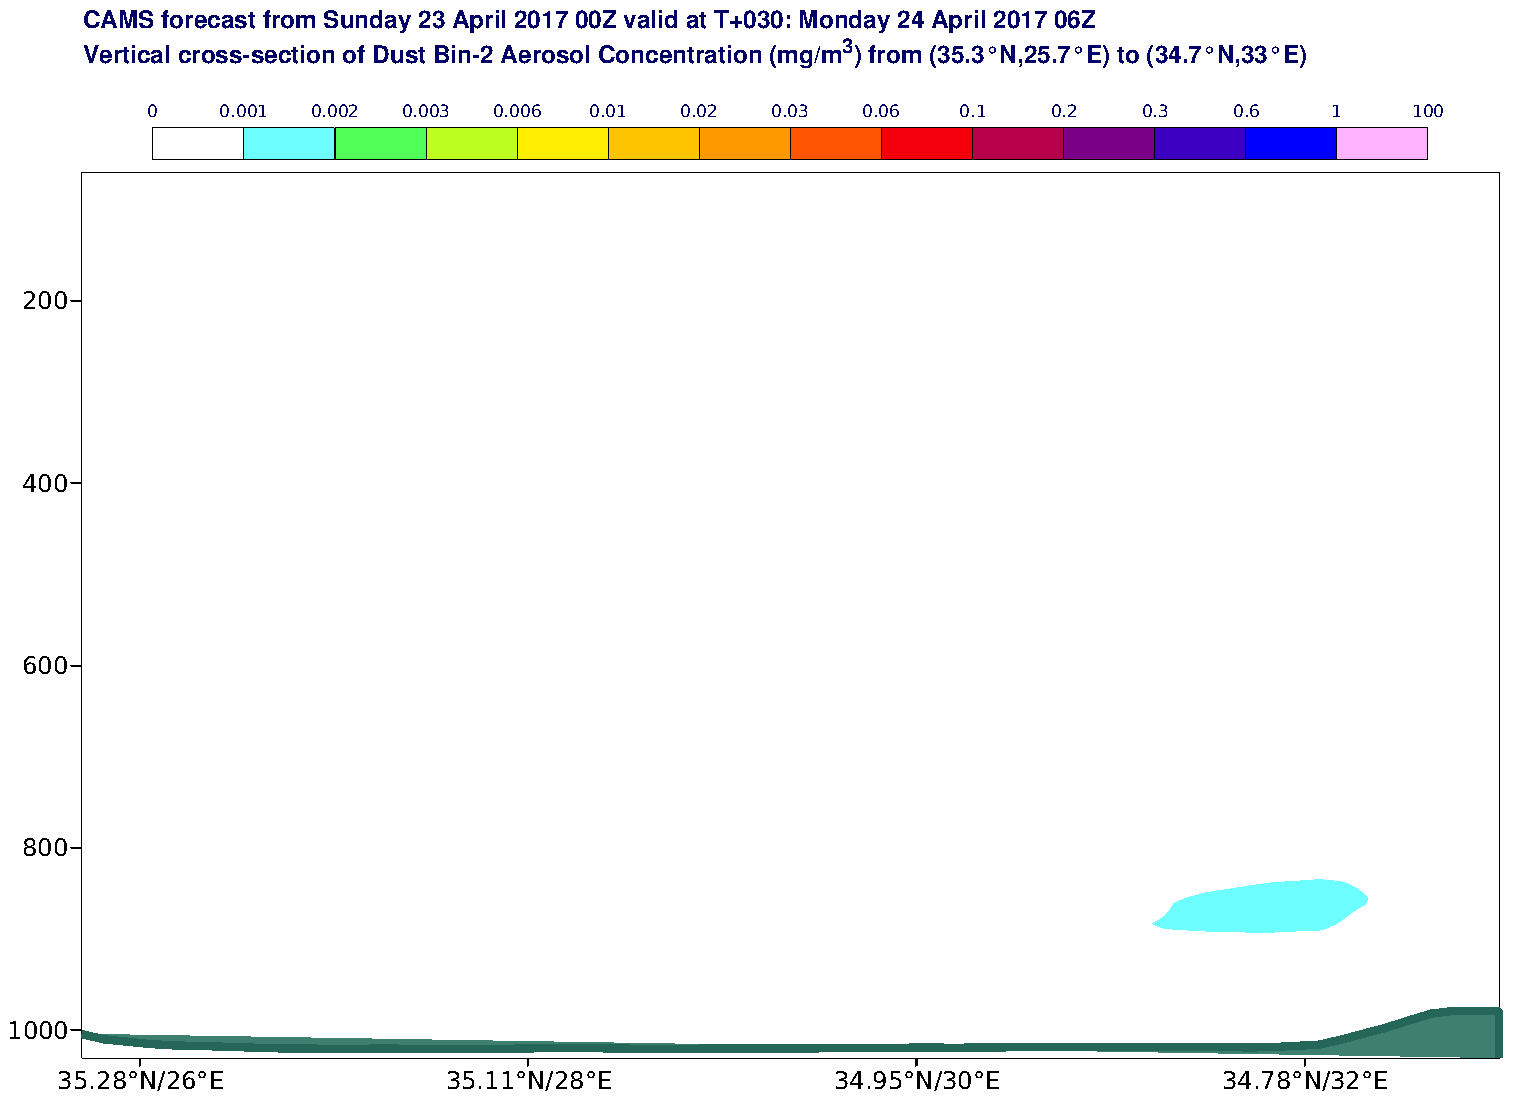 Vertical cross-section of Dust Bin-2 Aerosol Concentration (mg/m3) valid at T30 - 2017-04-24 06:00